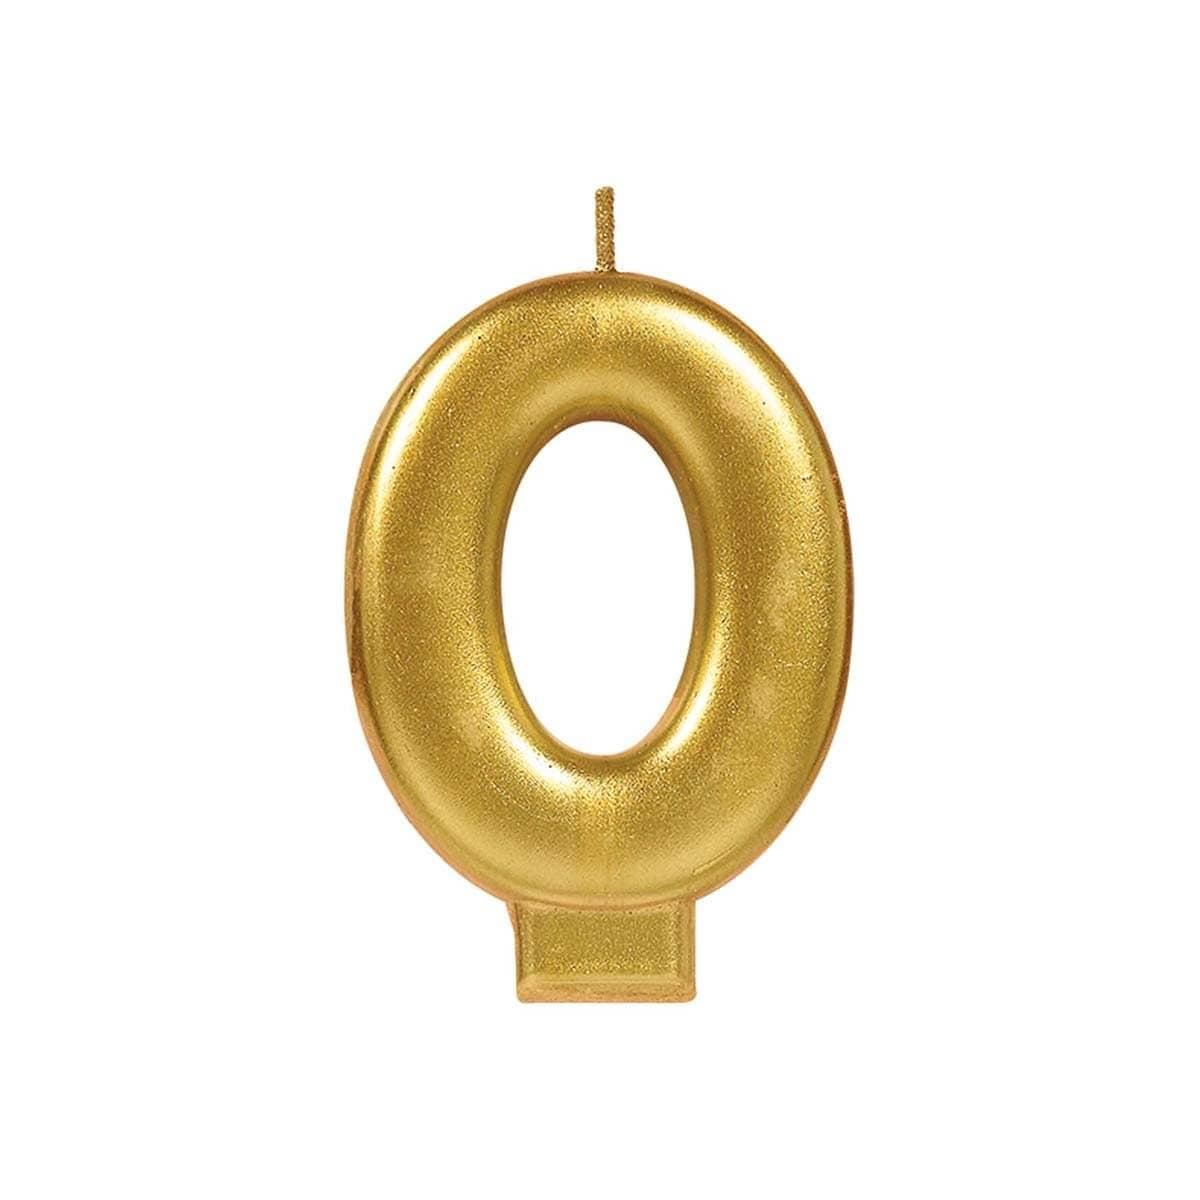 Buy Cake Supplies Metallic Numeral Candle #0 - Gold sold at Party Expert